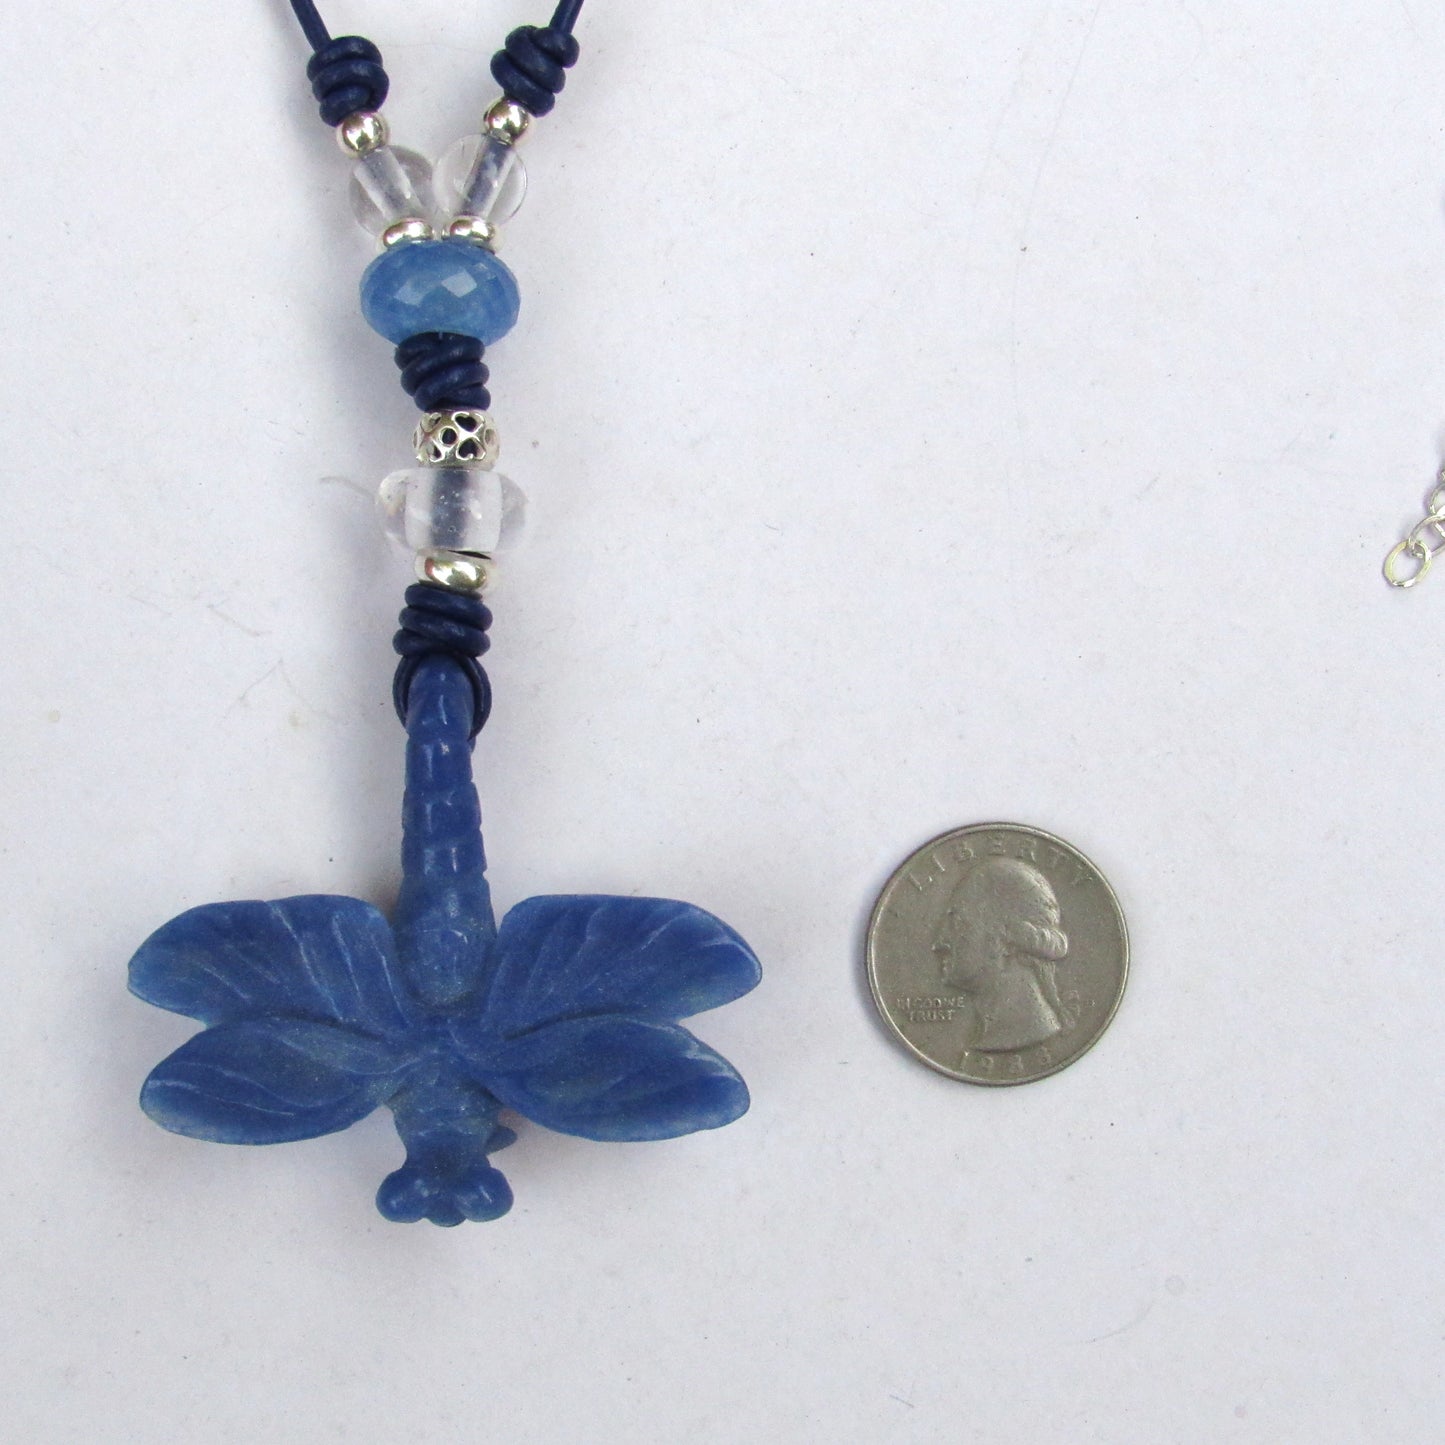 Blue Aventurine gemstone Dragon Fly with Clear Quartz and Sterling Silver